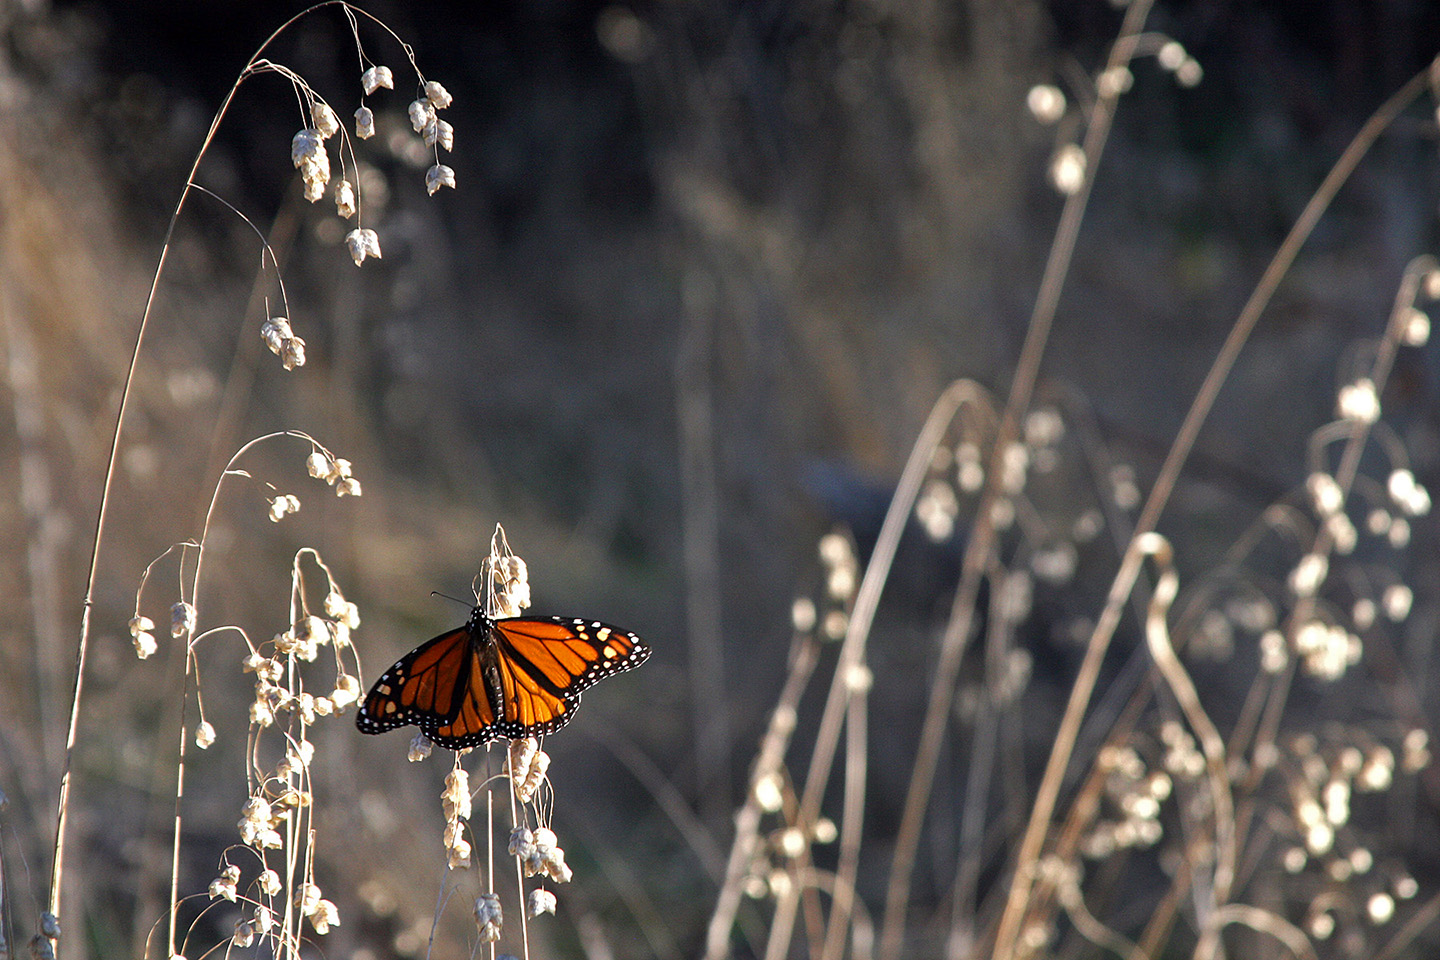 A monarch butterfly at Lighthouse Field State Beach in Santa Cruz, California